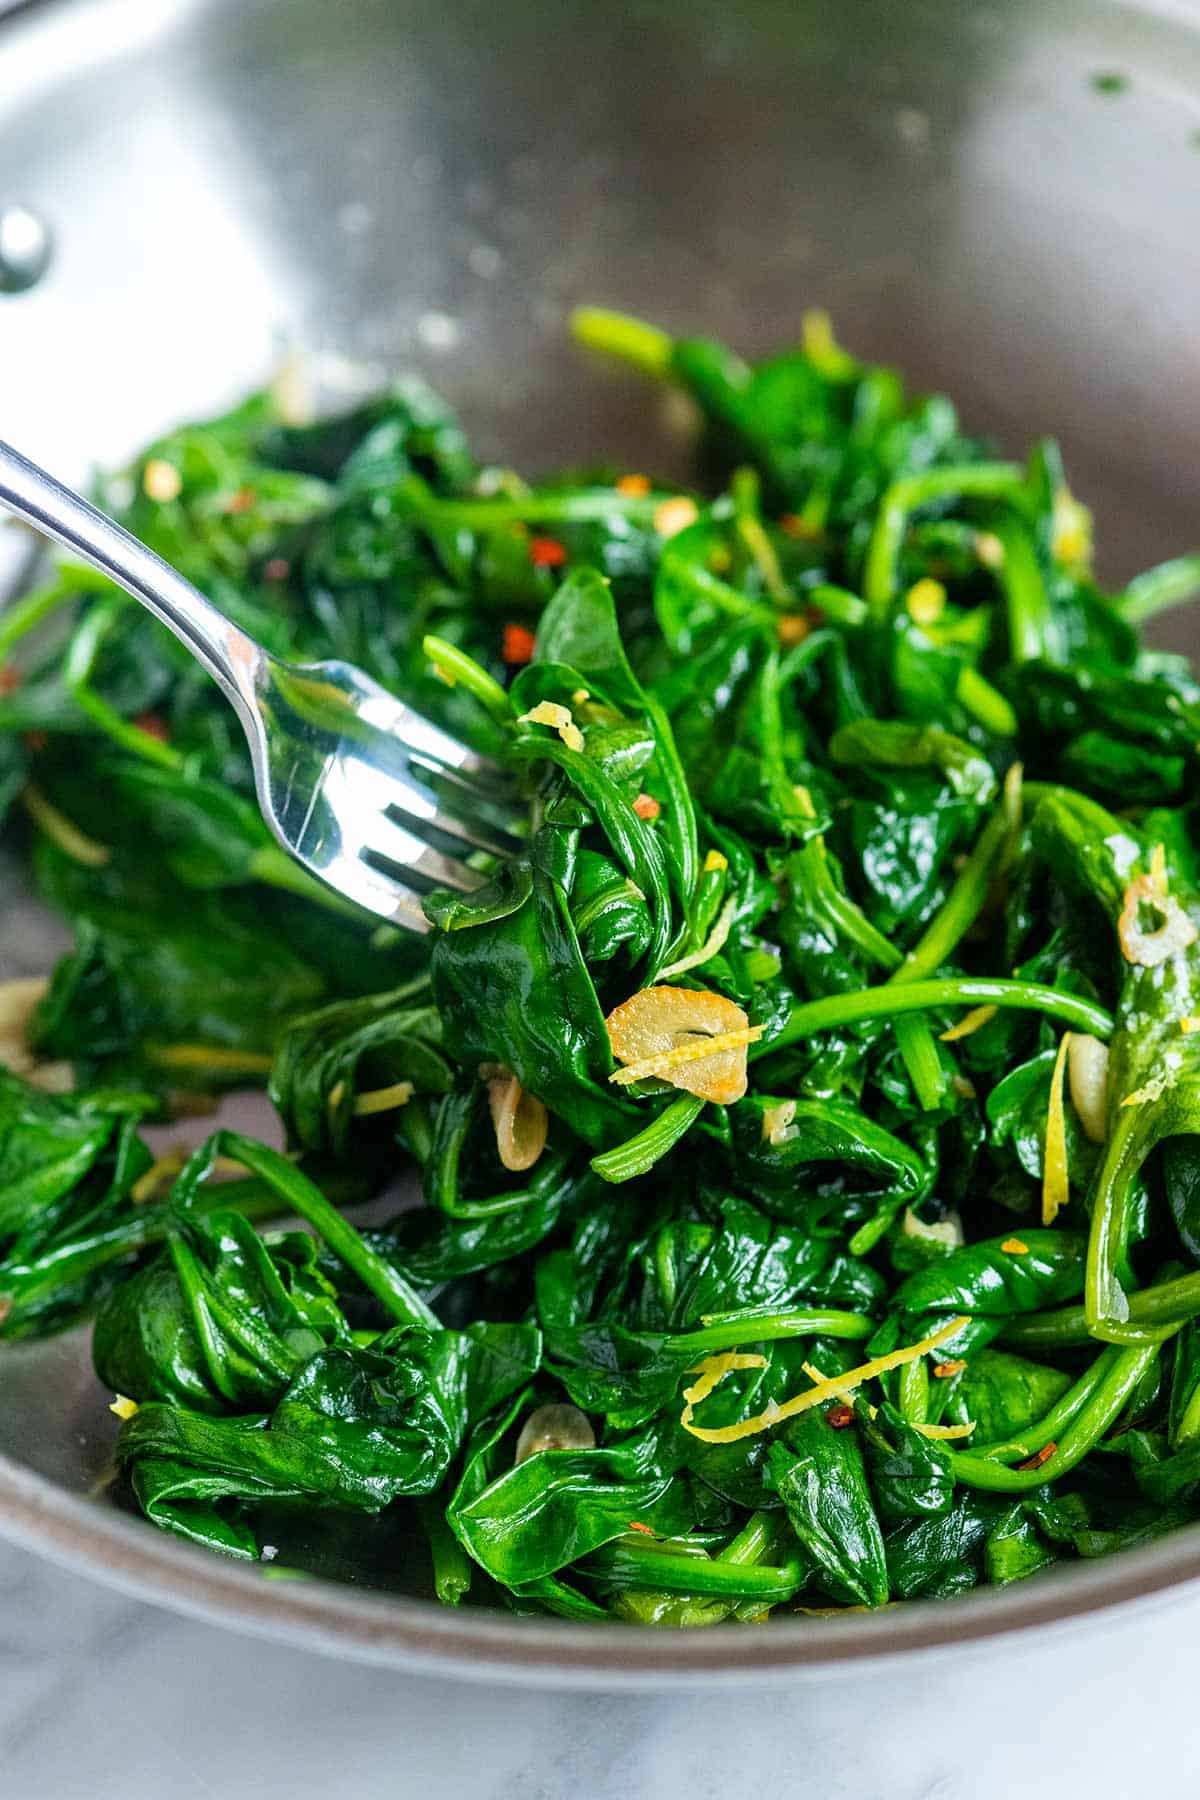 Spinach leaves cooked in a skillet with garlic and lemon